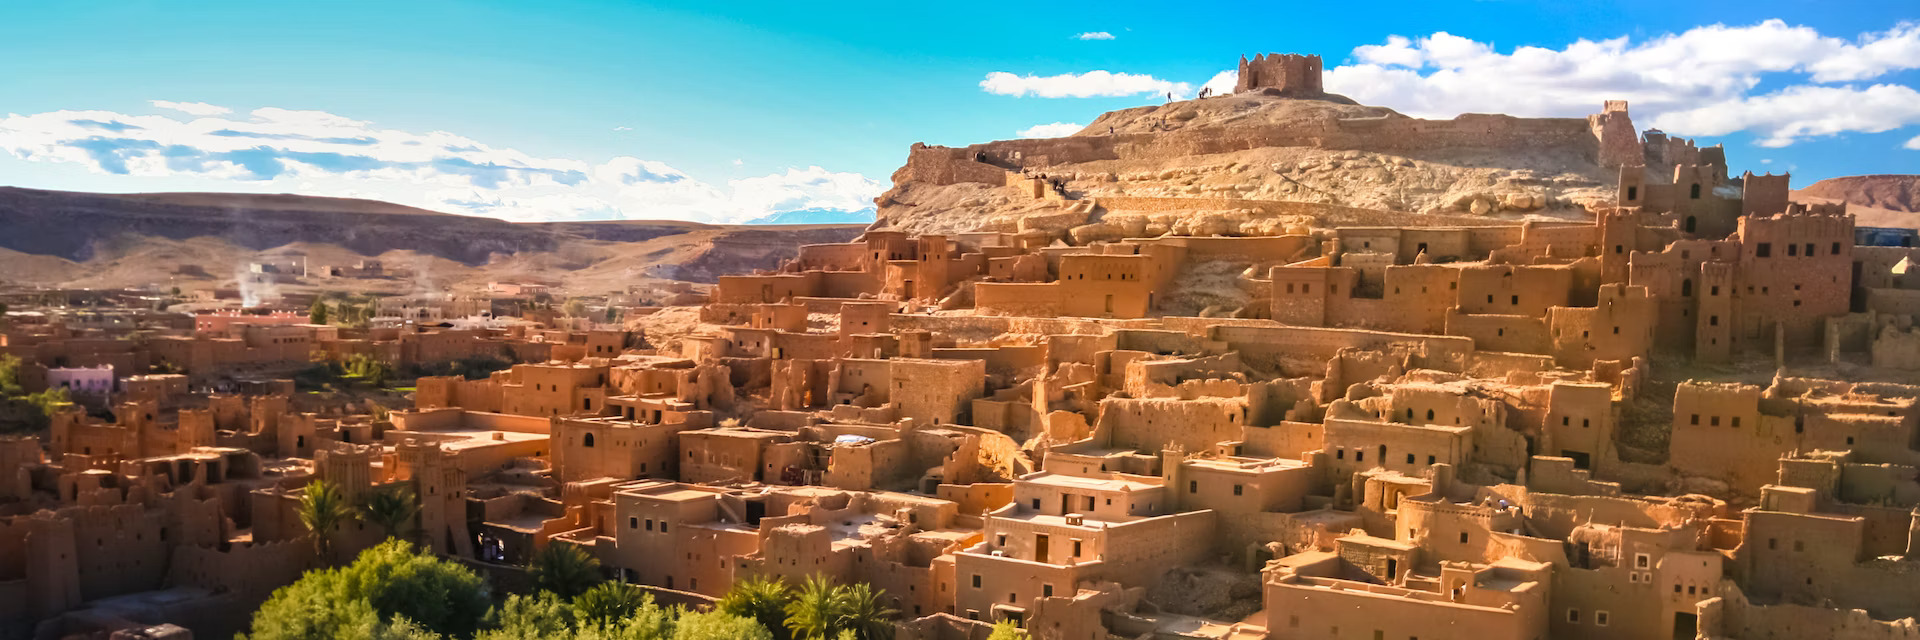 View of Ait Benhaddou, a historic Kasbah in Morocco, showcasing its distinctive earthen architecture and ancient cityscape.